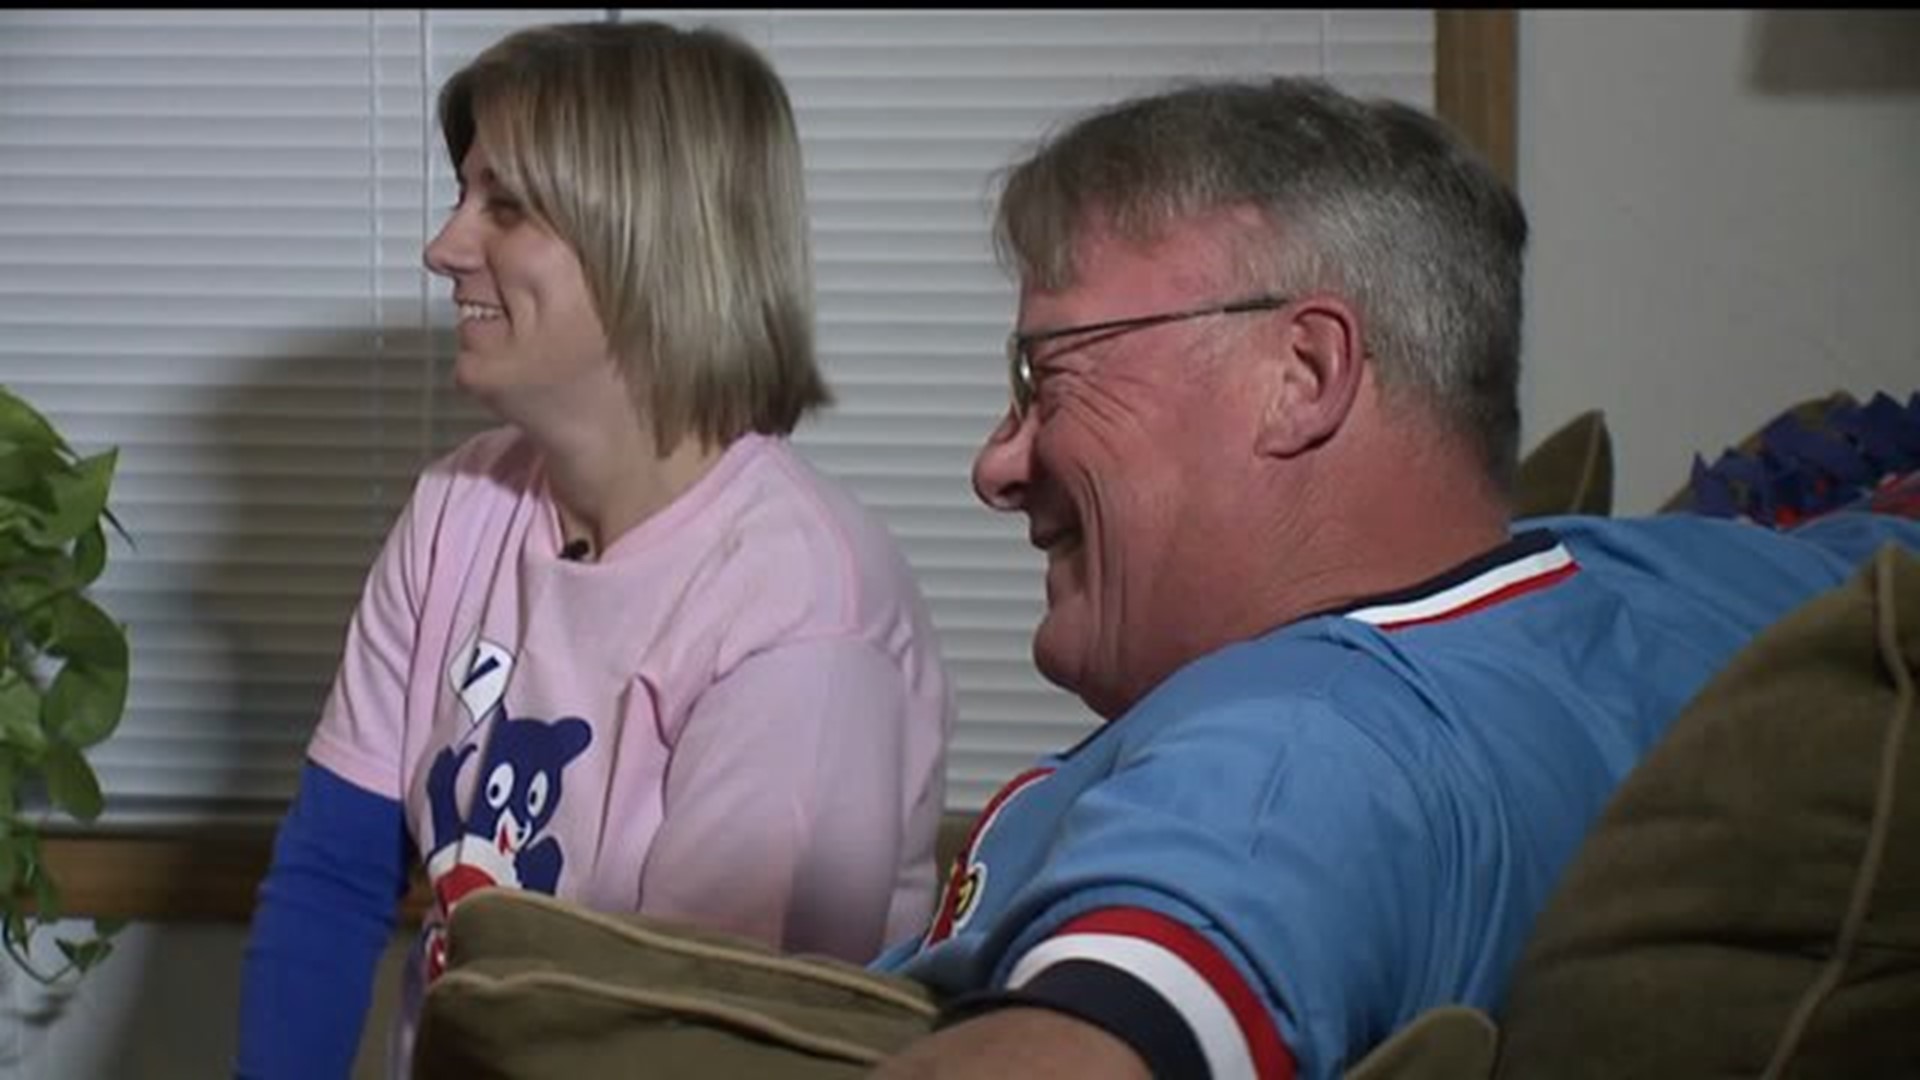 Colona couple proves Cardinals and Cubs fans can get along